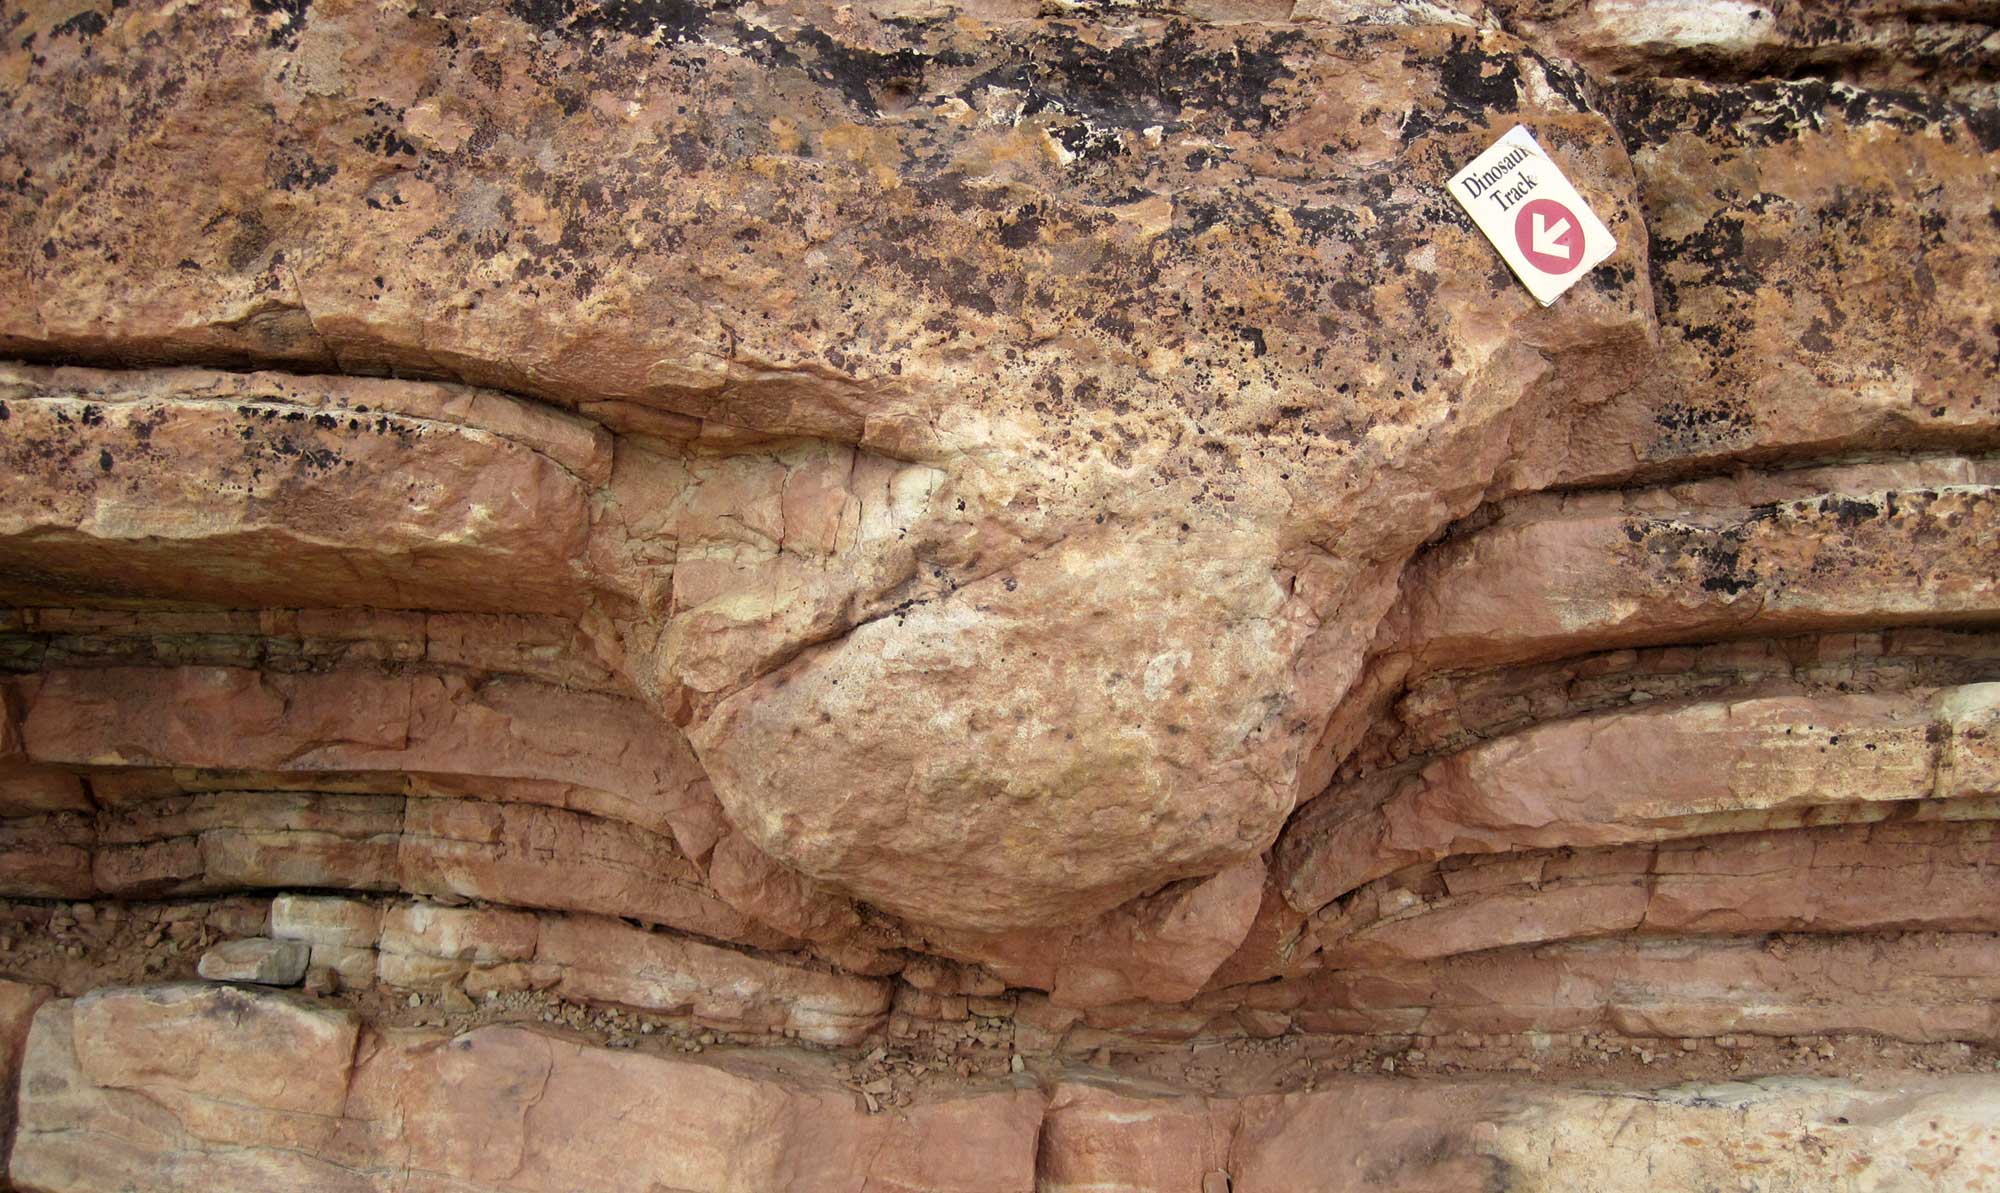 Photograph of a sauropod track from the Jurassic of Dinosaur Ridge in Colorado. The photo shows a light orange vertical rock face with an overhanging ledge. Part of the ledge abruptly bulges downward. This bulge is the track.